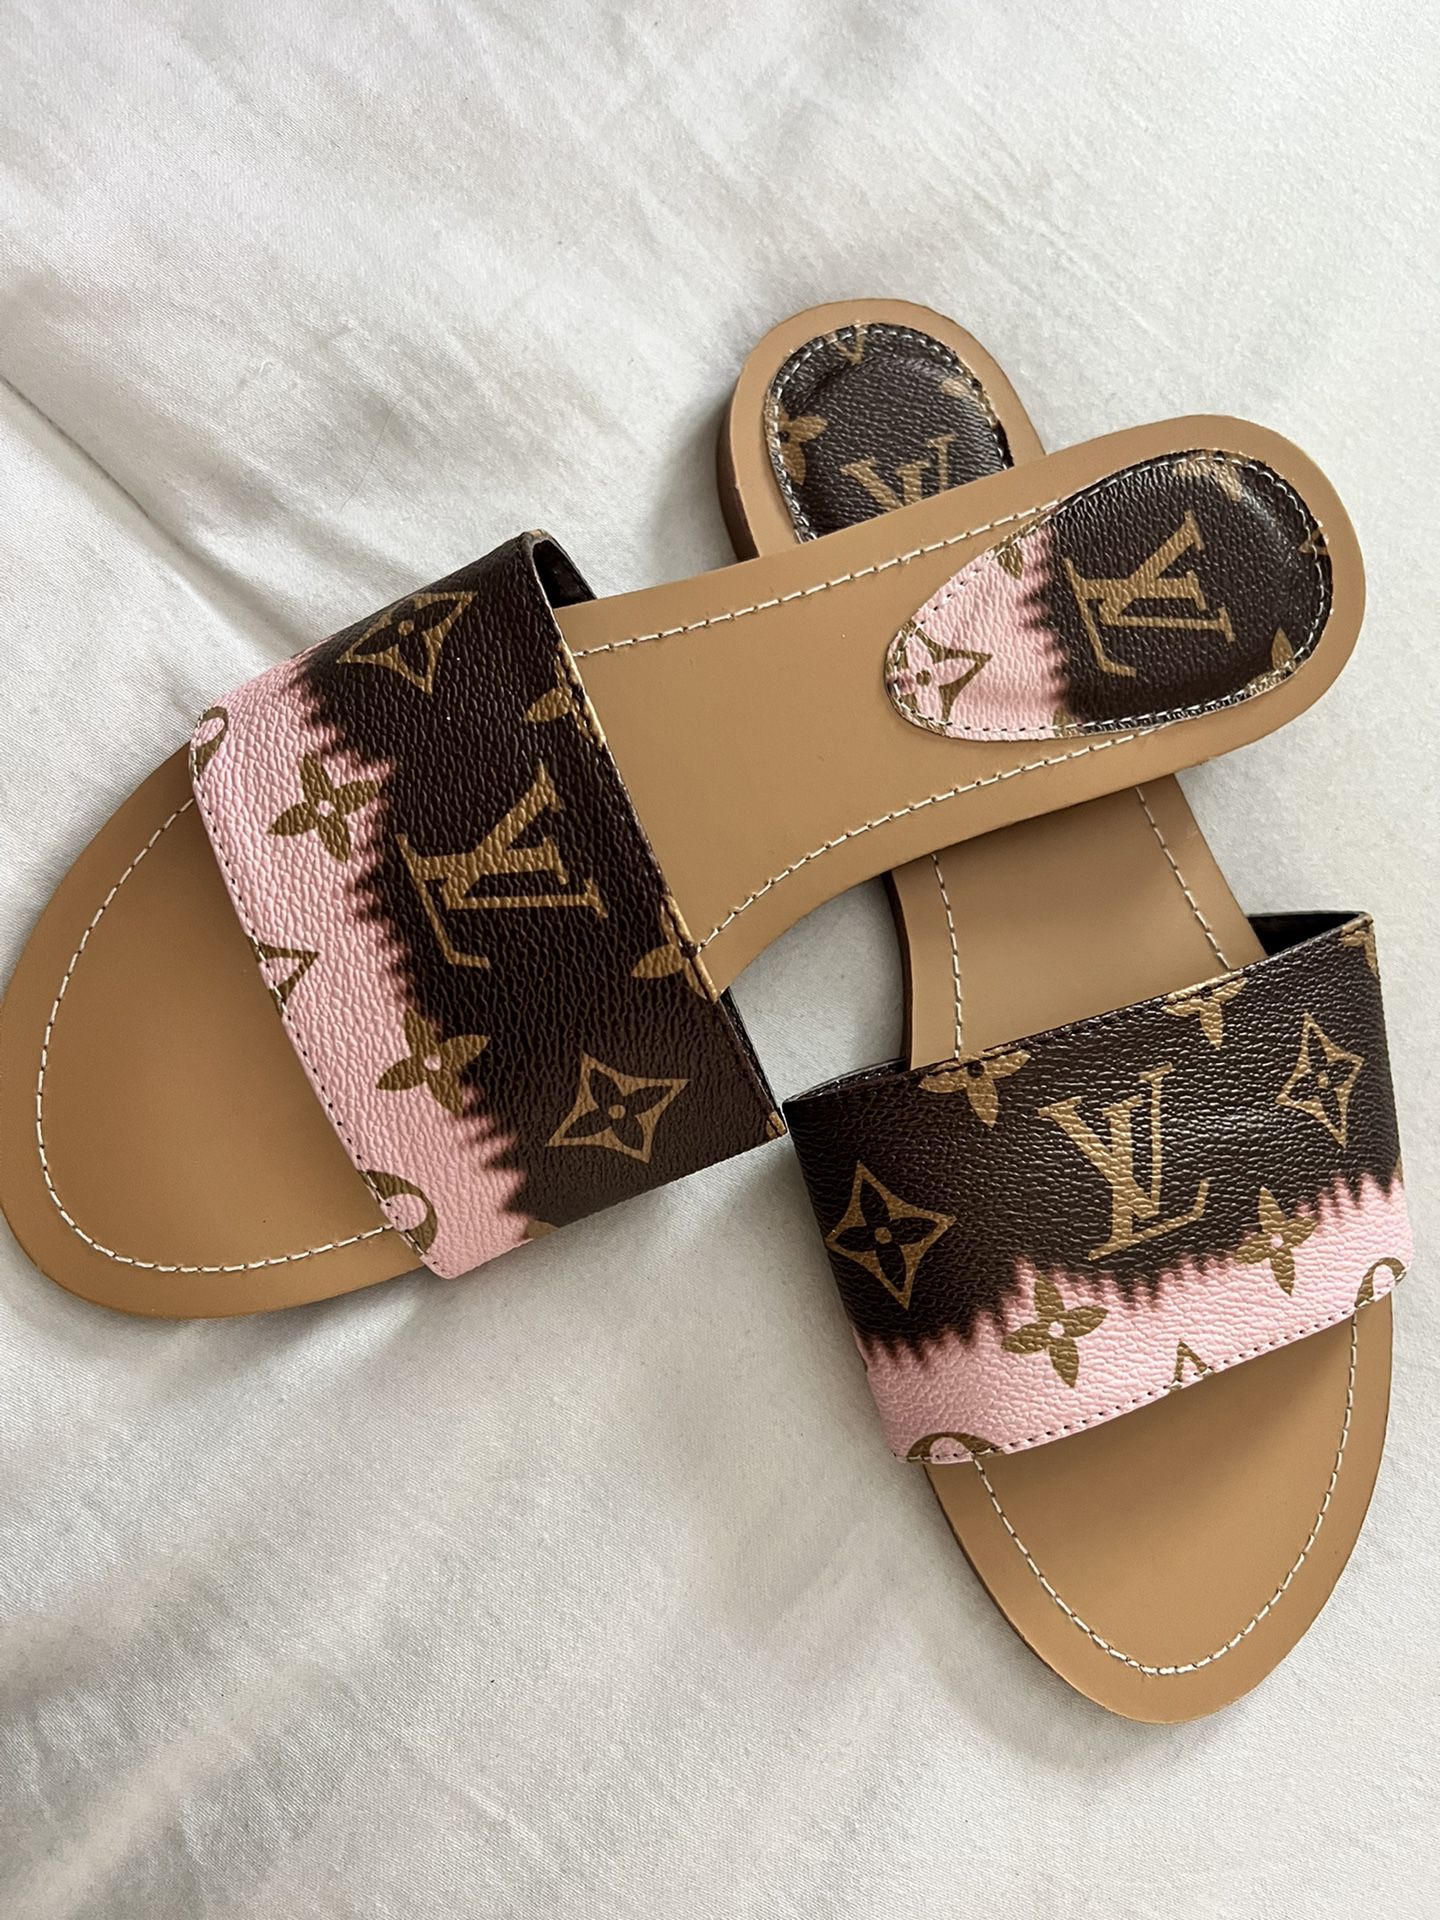 LV Louis Vuitton Bom Dia Flat Comfort Mule Sandals for Sale in City Of  Industry, CA - OfferUp